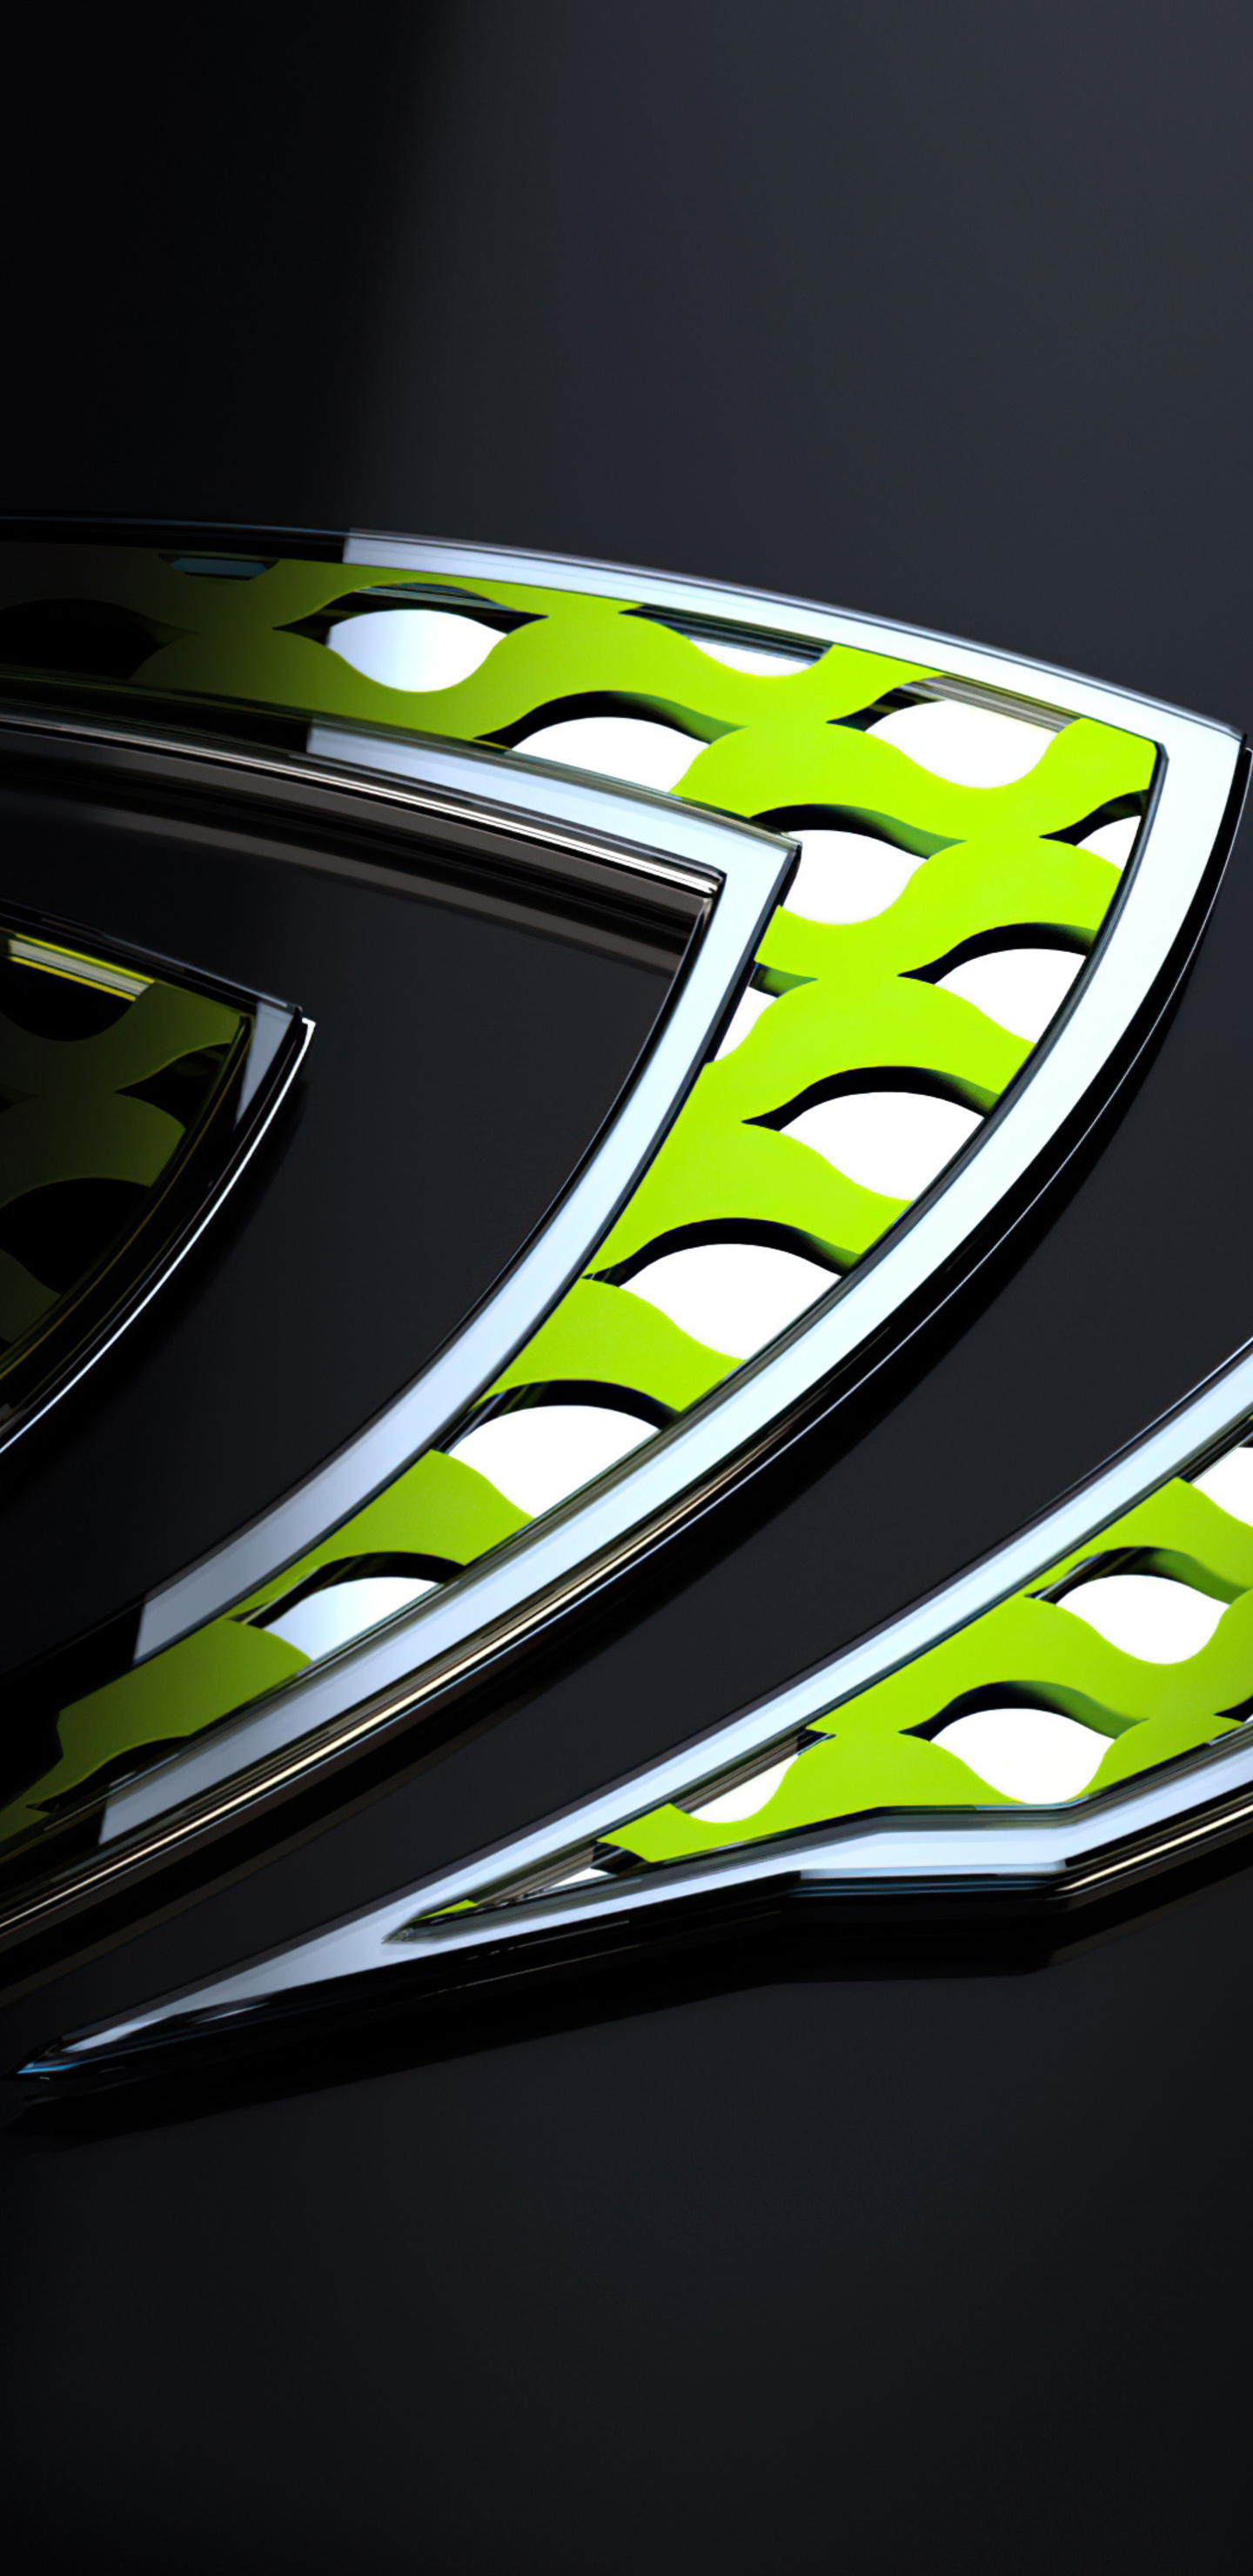 1440x2960 Nvidia Cinema 4d Logo Samsung Galaxy Note 9,8, S9,S8,S8+ QHD HD  4k Wallpapers, Images, Backgrounds, Photos and Pictures